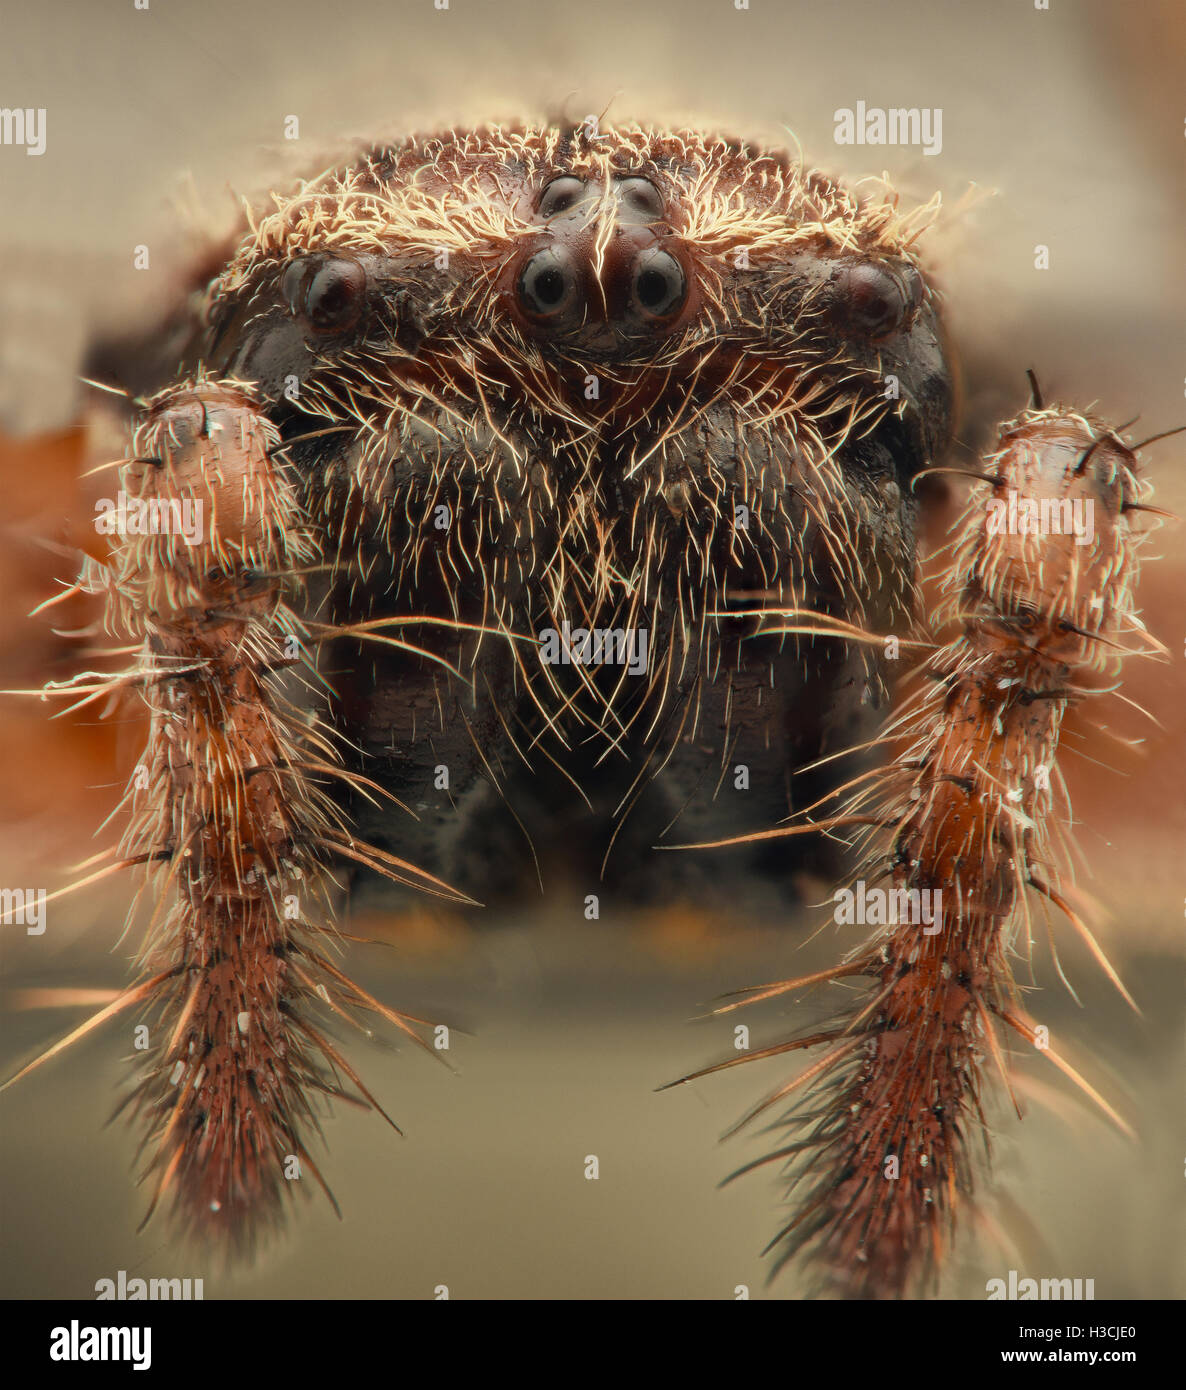 Extreme magnification - Cross spider closeup Stock Photo